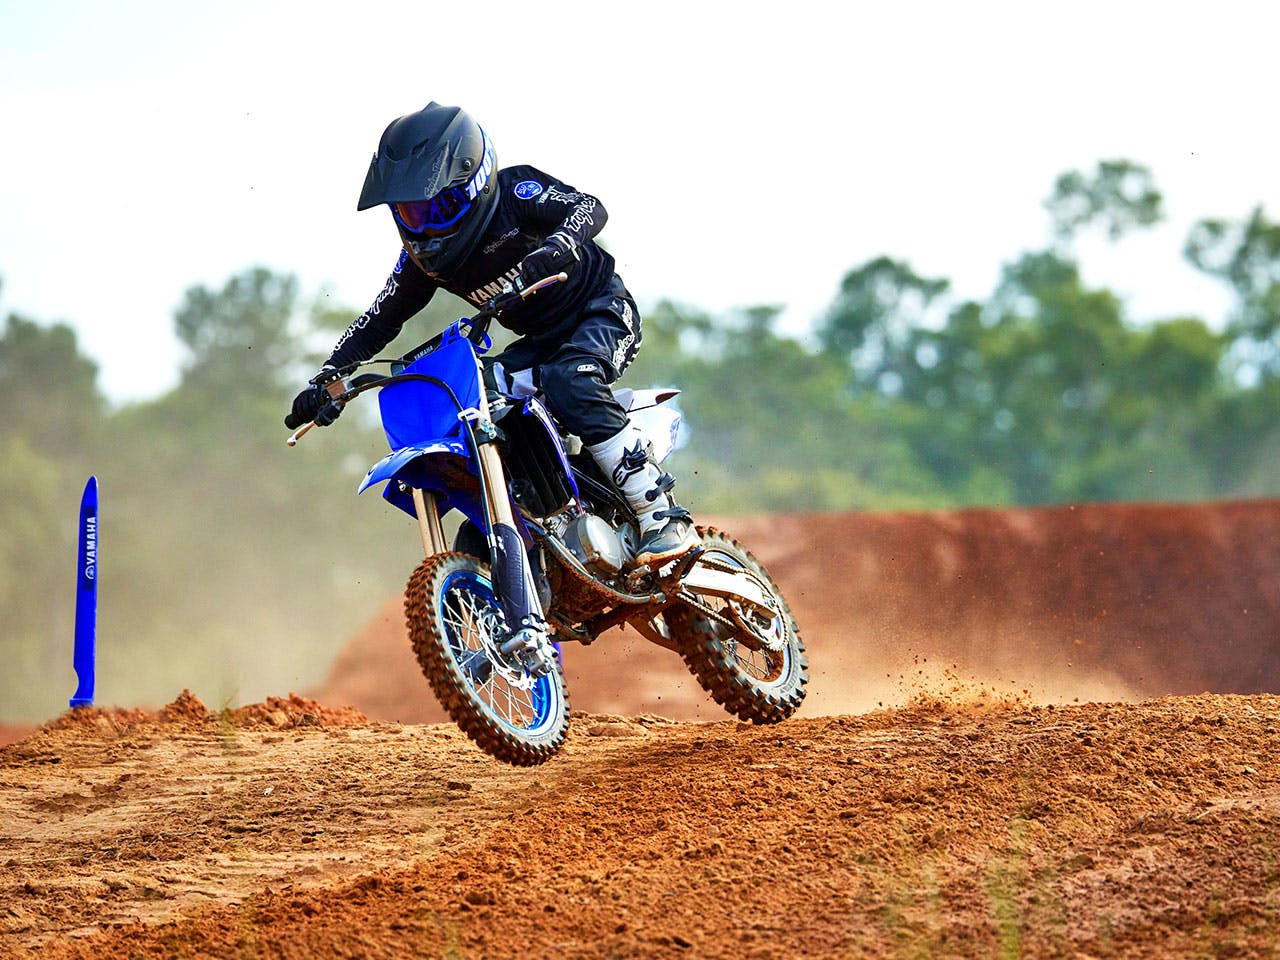 Yamaha YZ65 in team yamaha blue colour , being ridden off-track